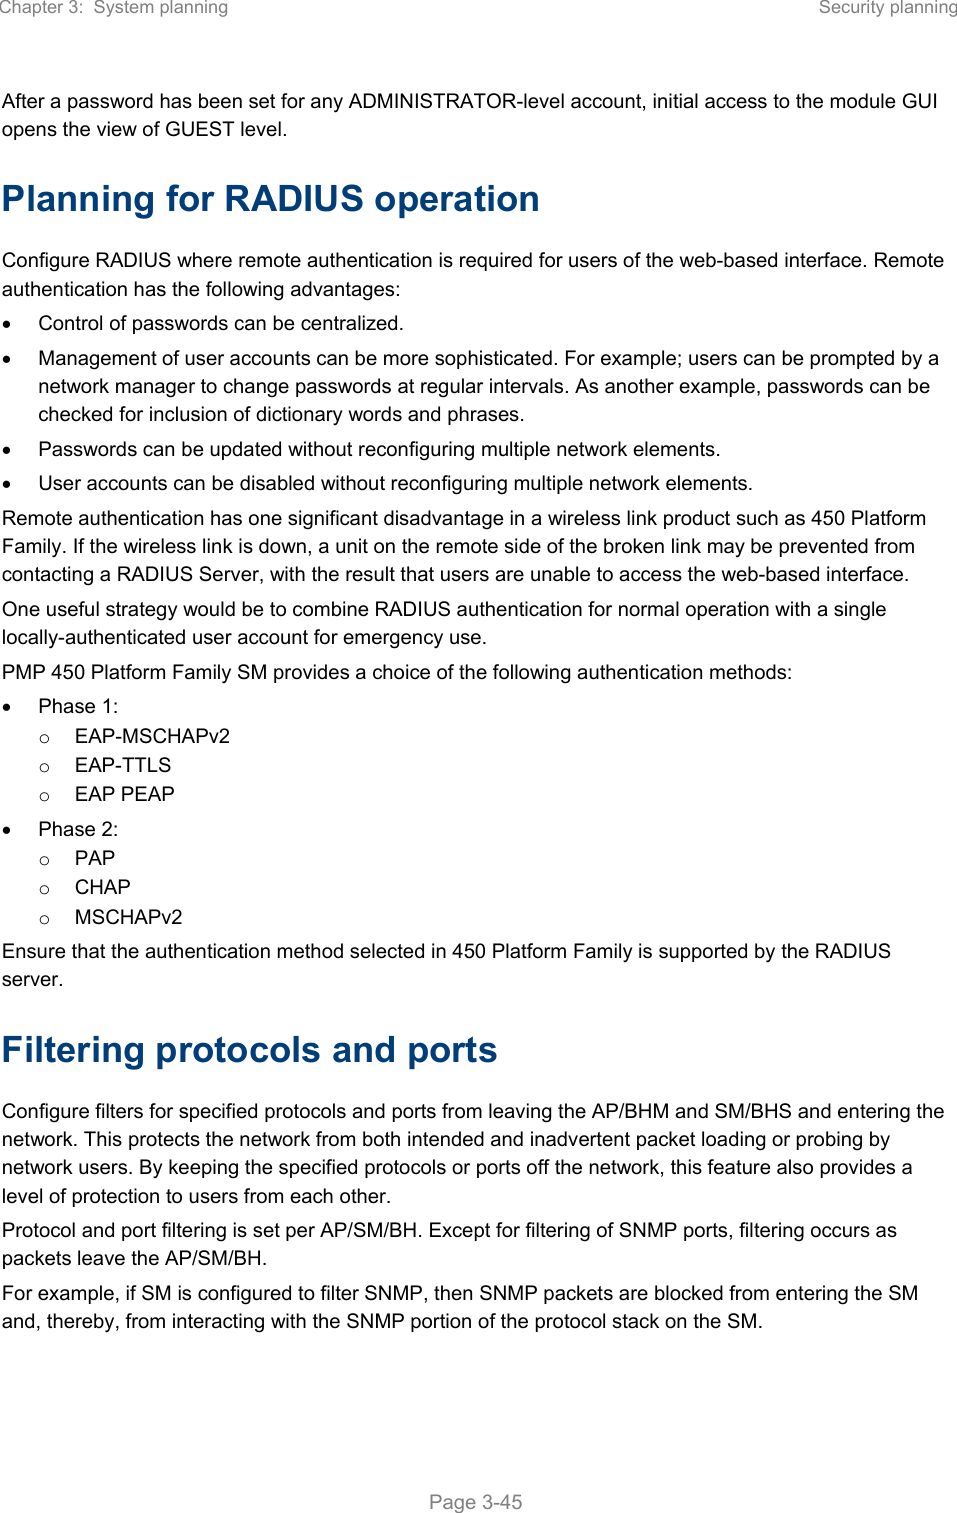 Page 178 of Cambium Networks 50450M 5GHz Point to MultiPoint Multi User MIMO Access Point User Manual PART1